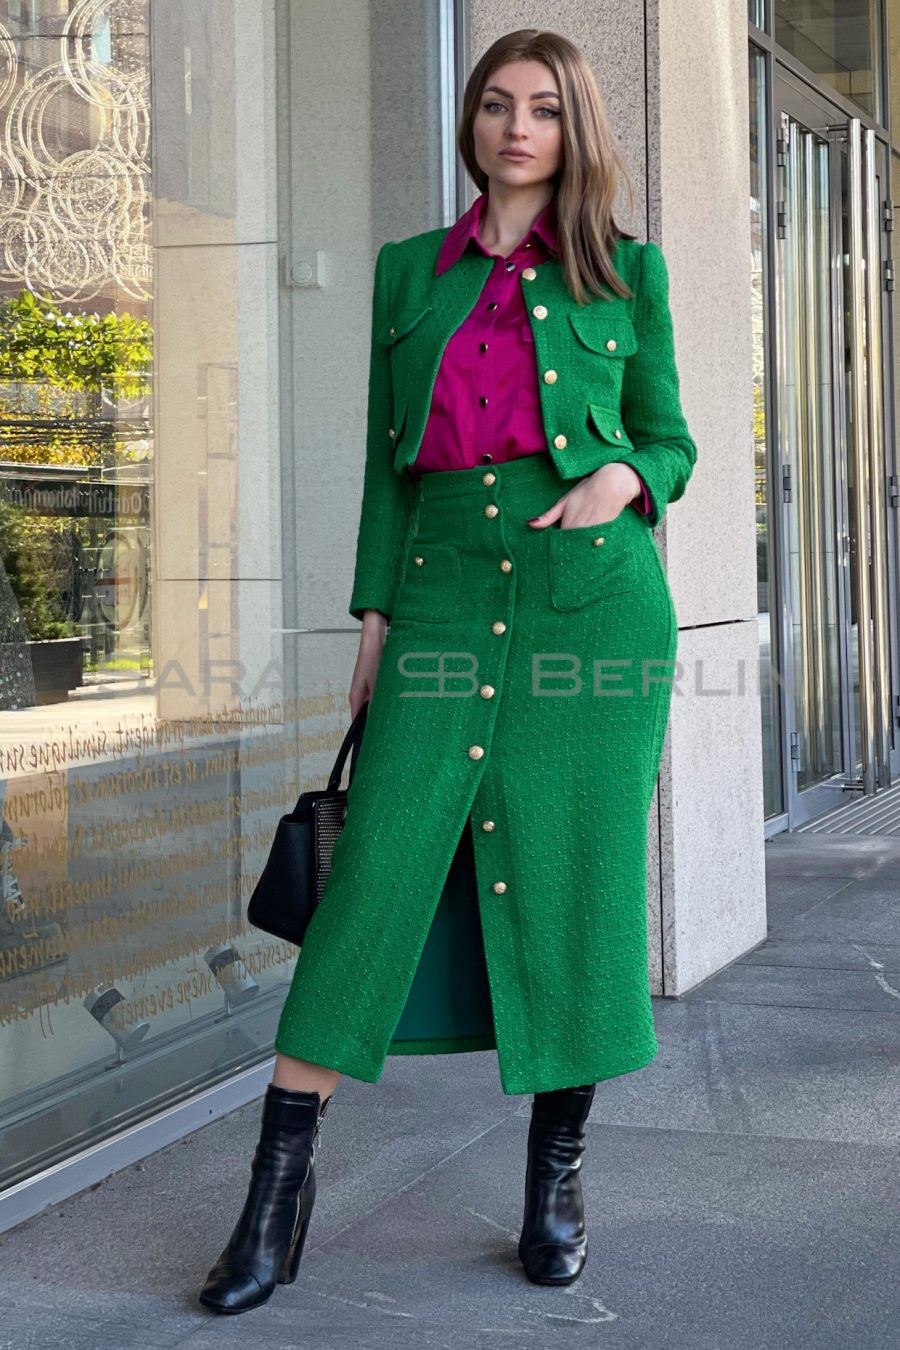 Two-piece tweed suit - collarless jacket and skirt